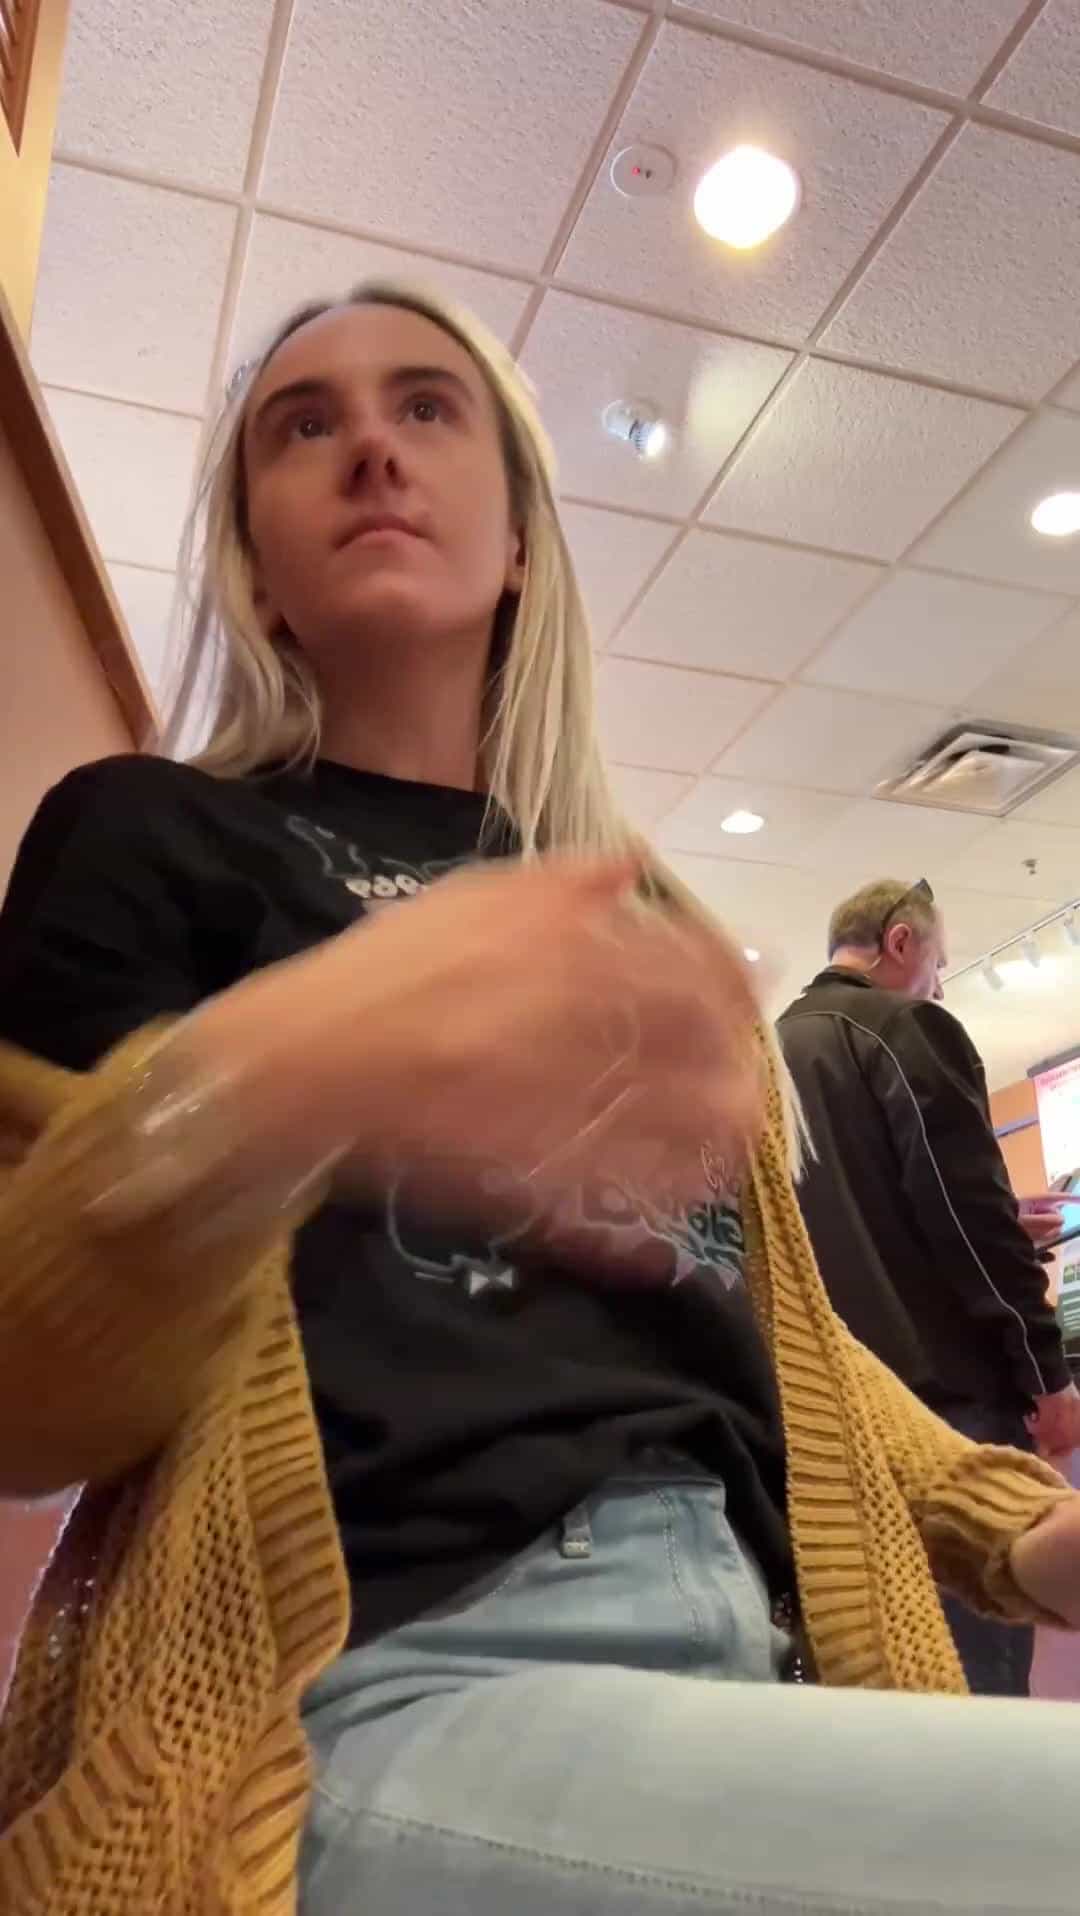 A quick one in a crowded Panera for your viewing pleasure ;)